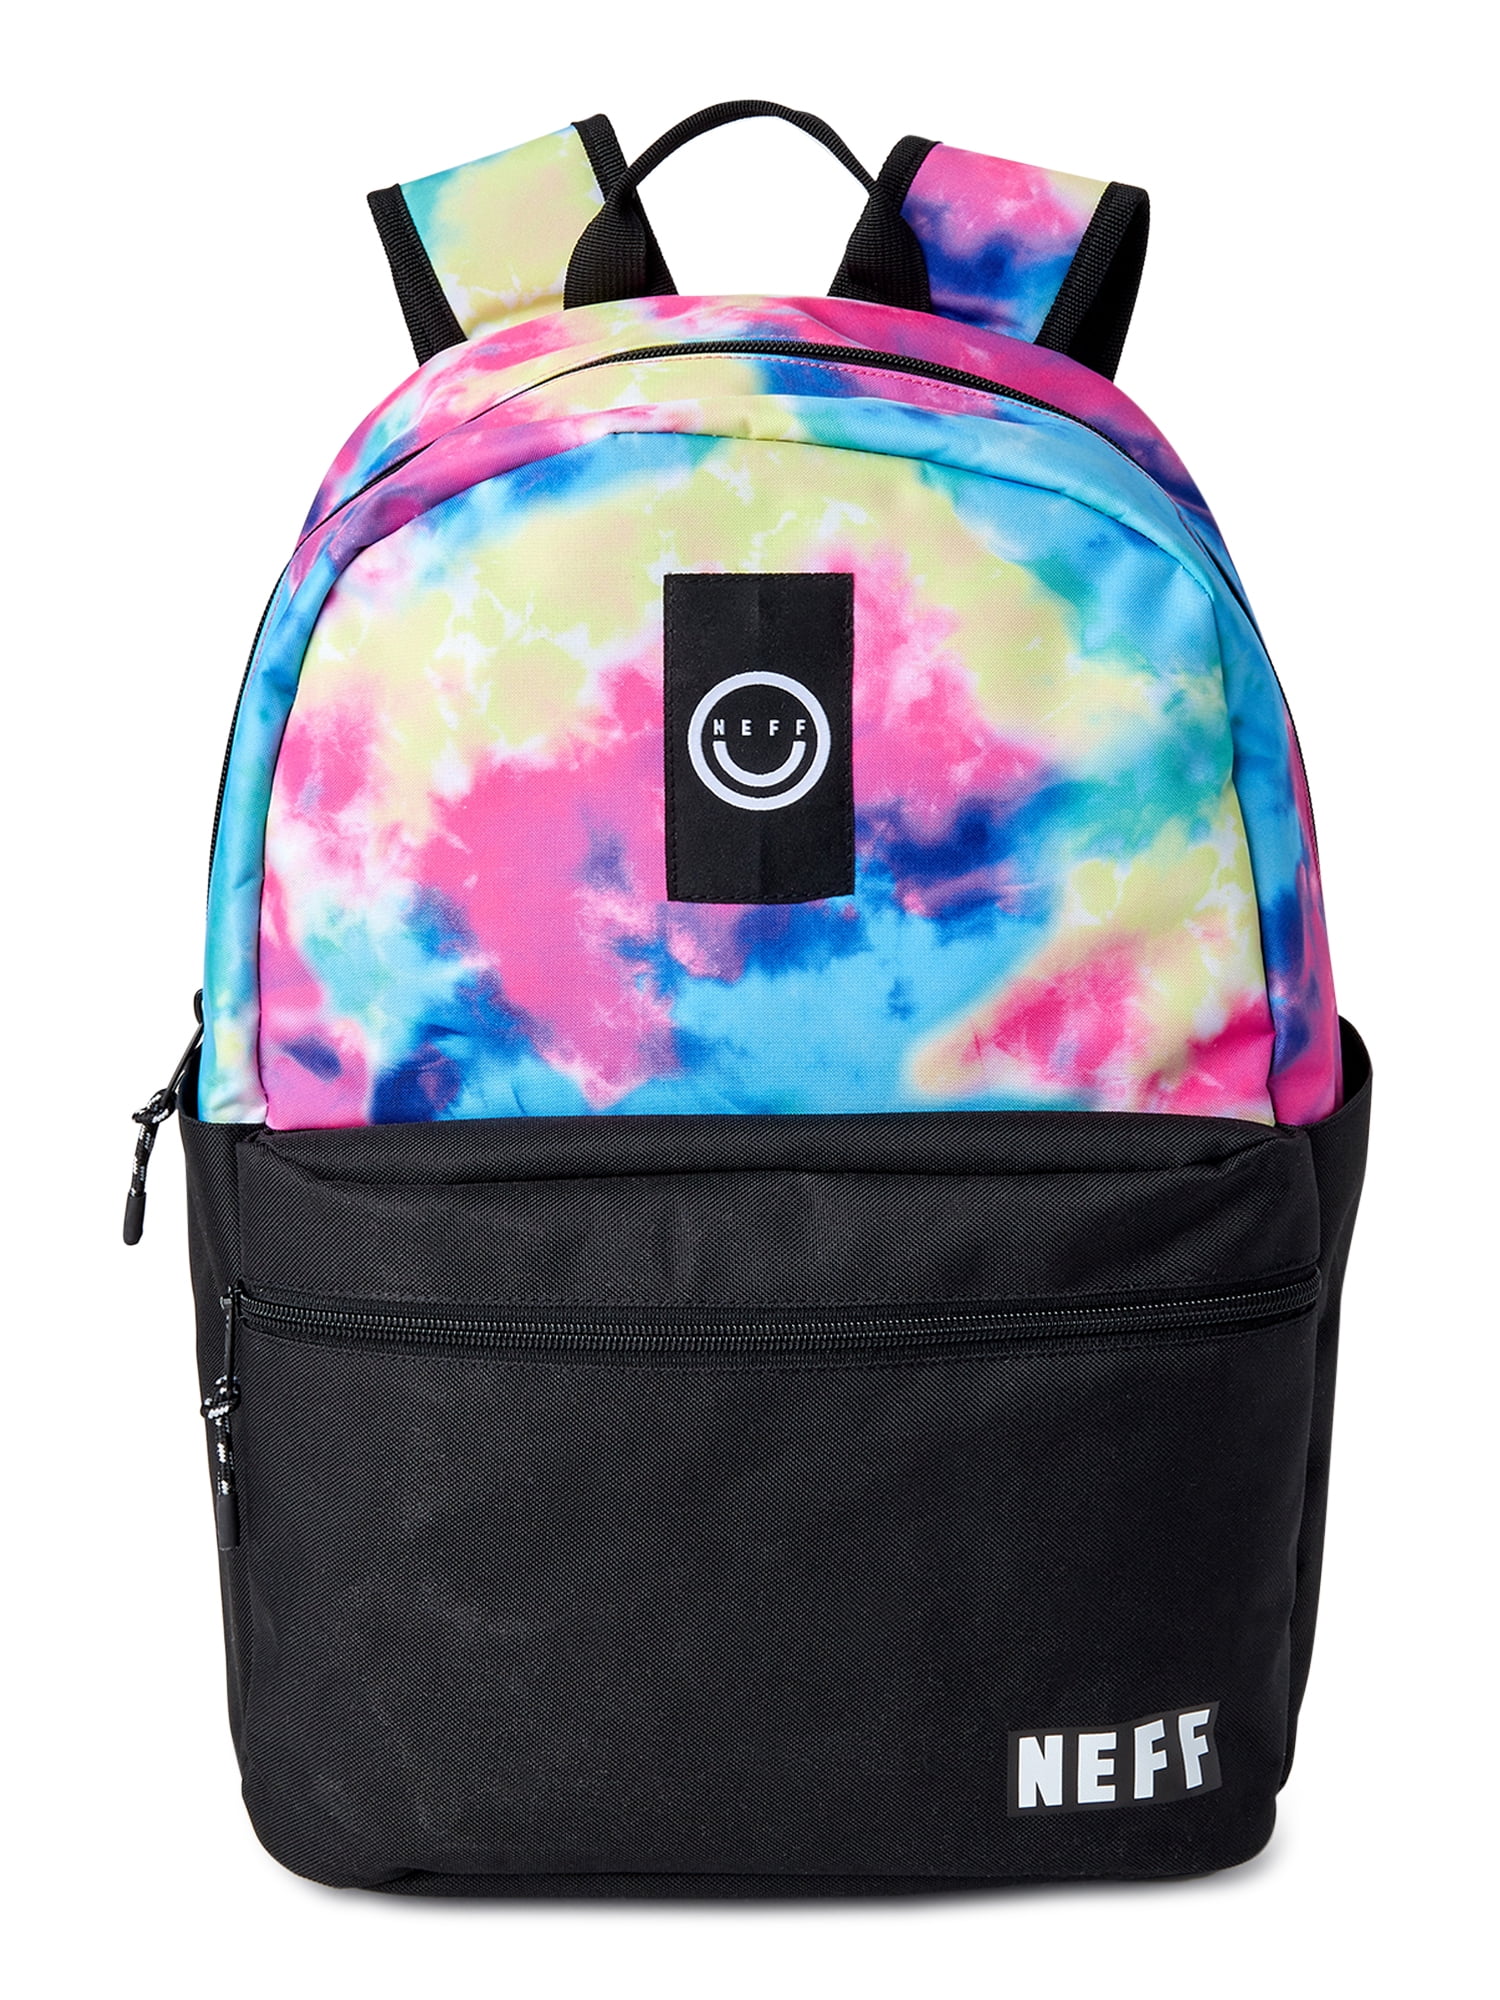 Neff Daily Backpack 2013 | GetBoards.com